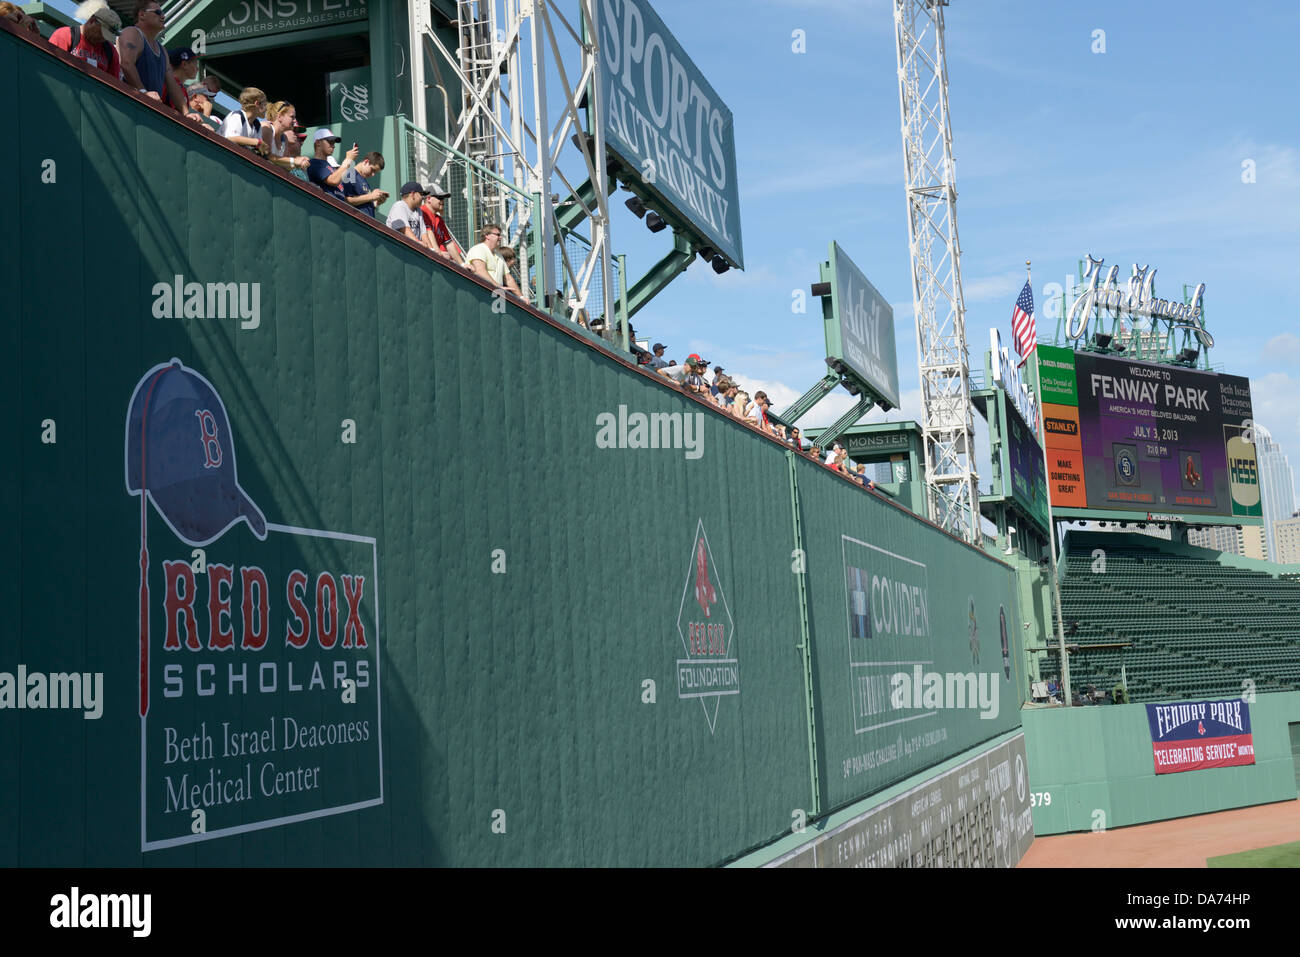 Green Monster leftfield wall Historic Fenway Park Boston Red Sox Boston Ma.  USA May 20 2010 Red Sox versus Minnesota Twins Stock Photo - Alamy